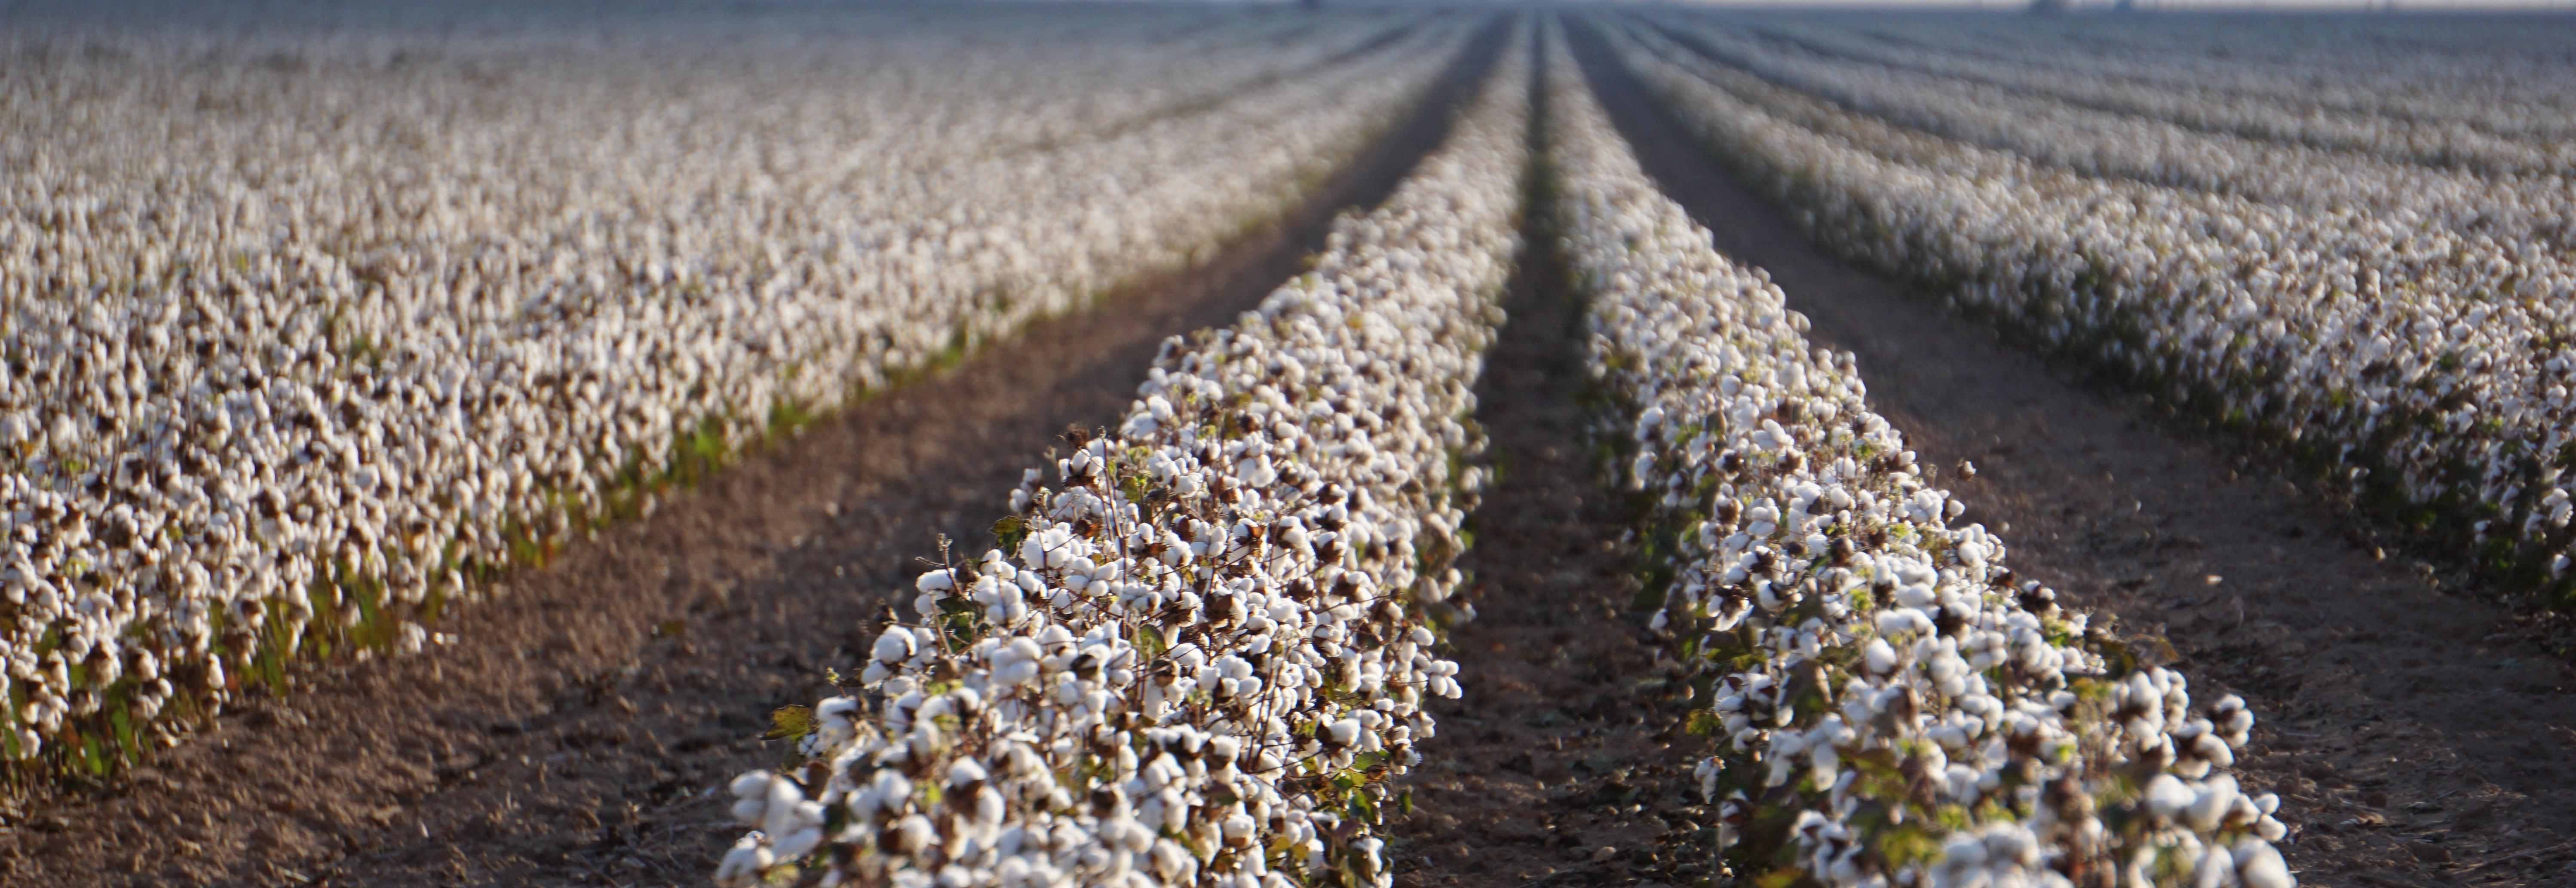 Rows of cotton plants in a field